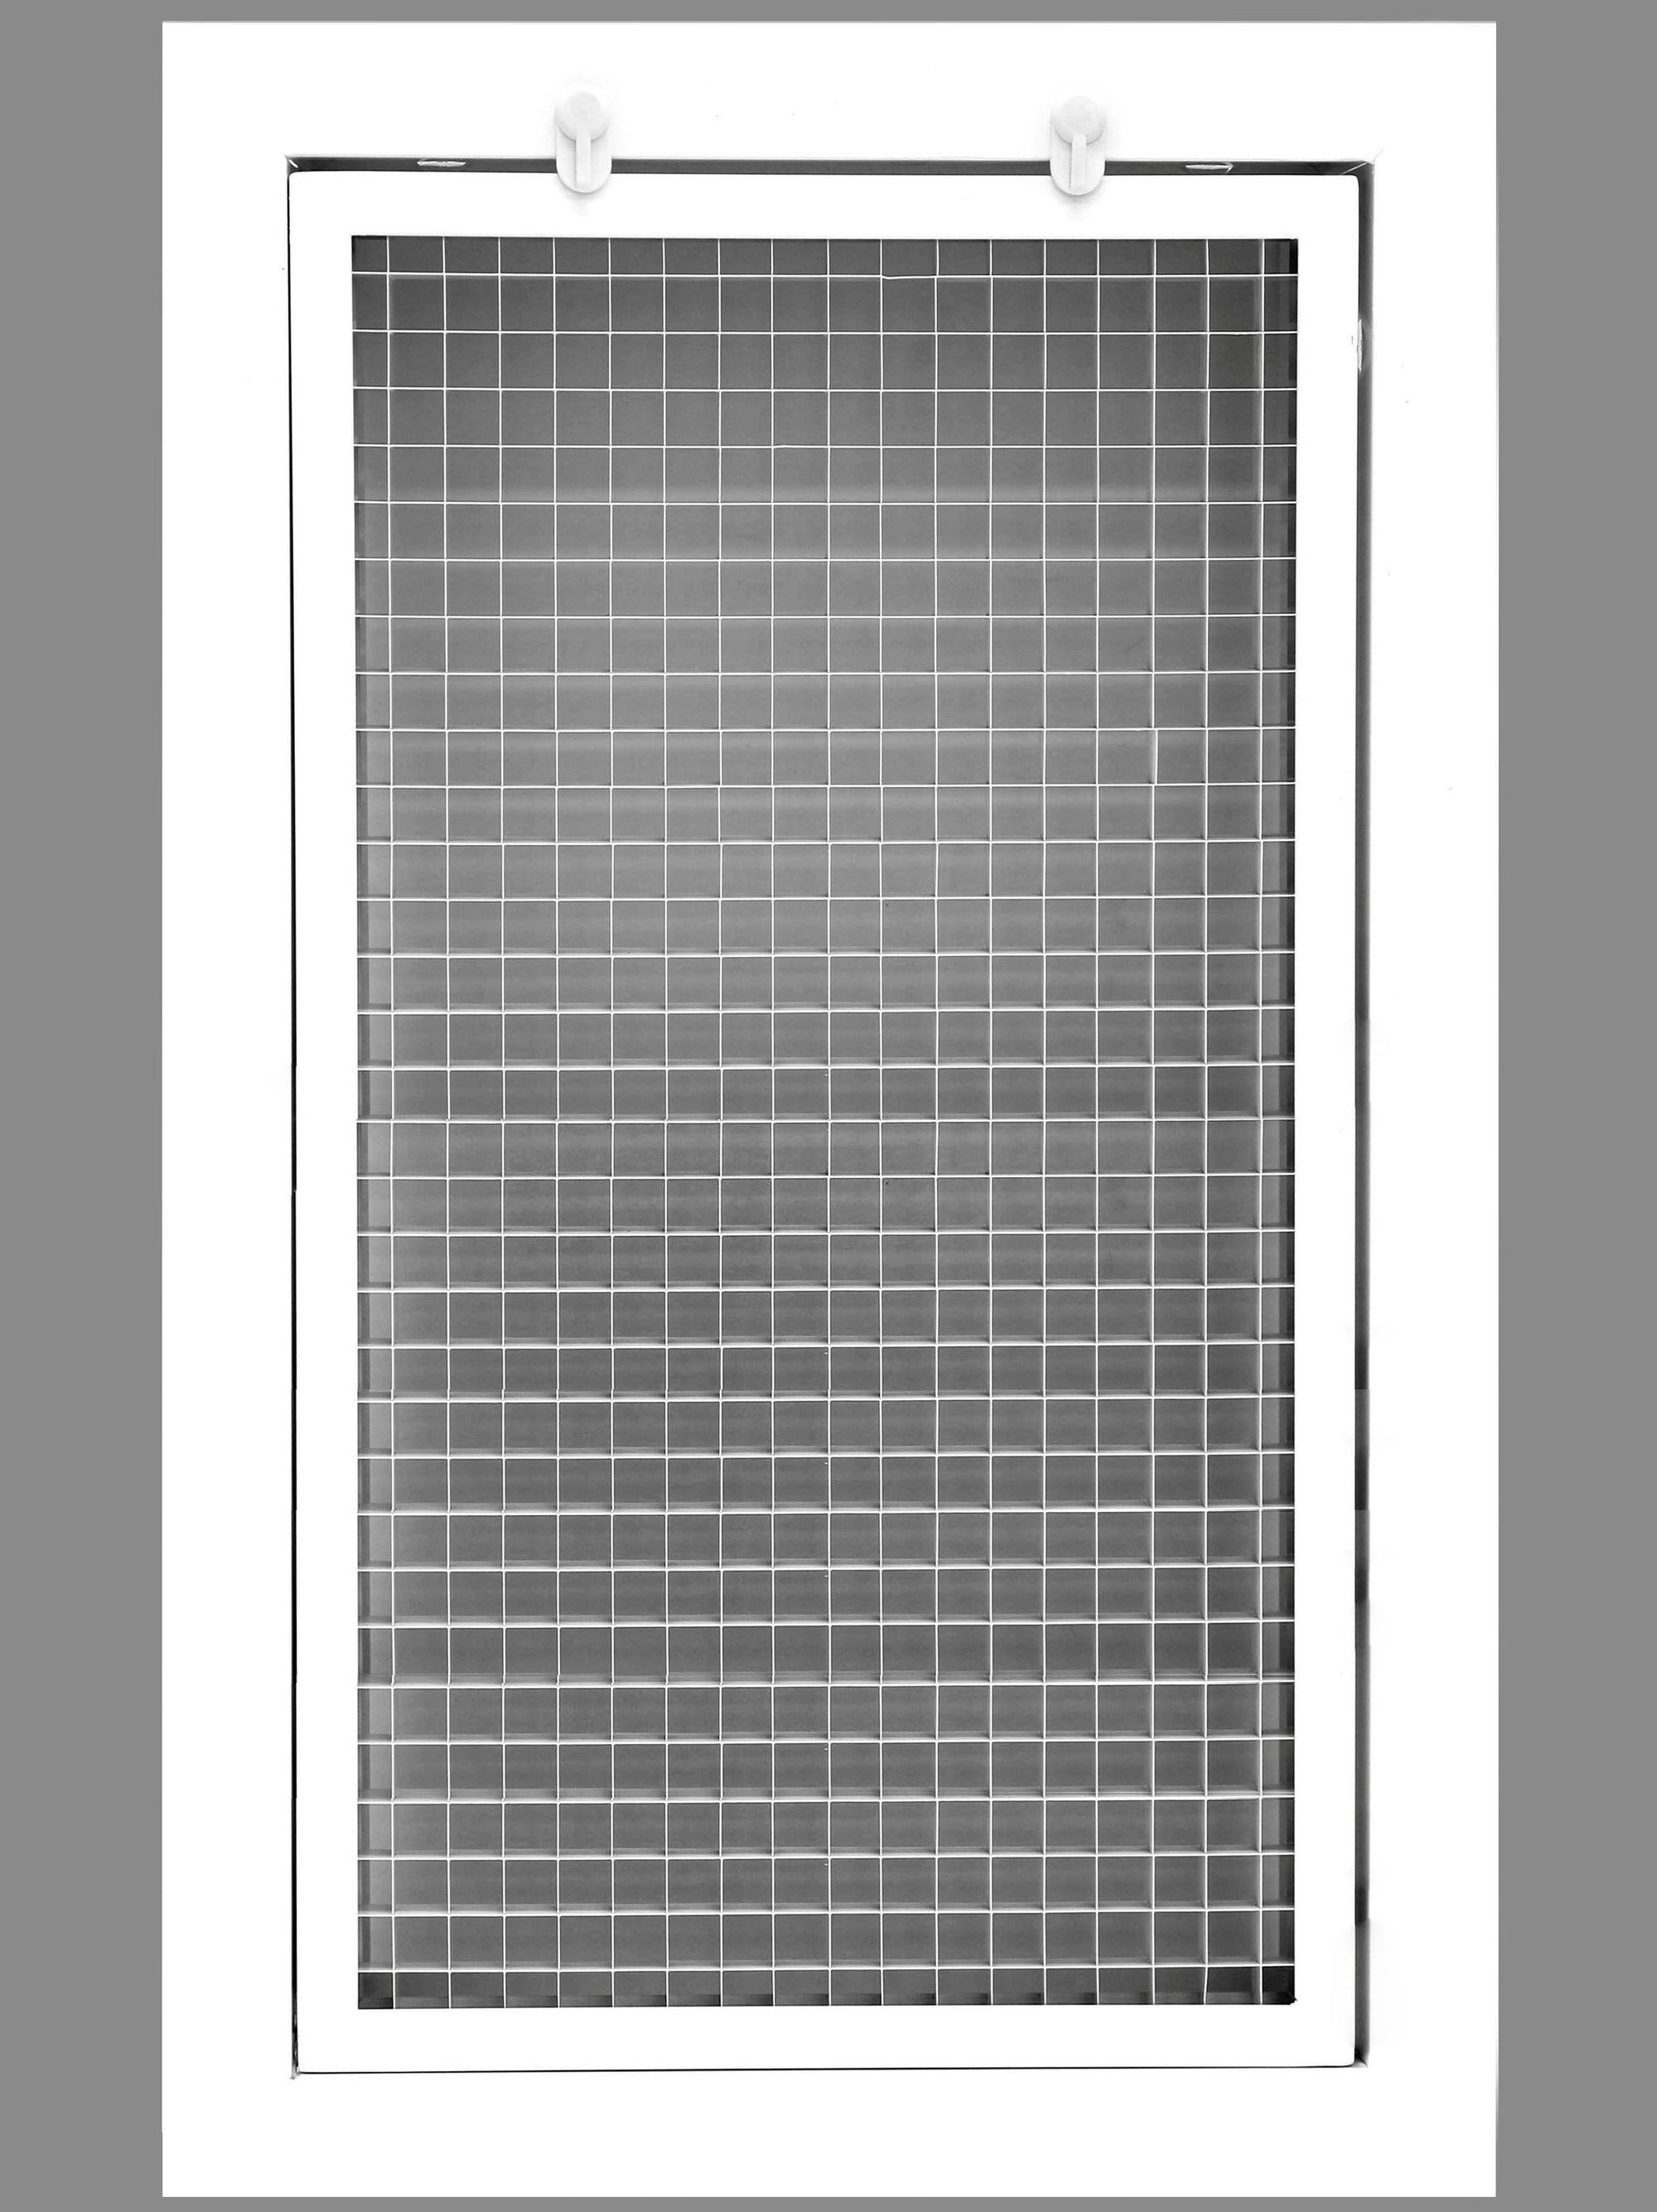 8" x 16" Cube Core Eggcrate Return Air Filter Grille for 1" Filter